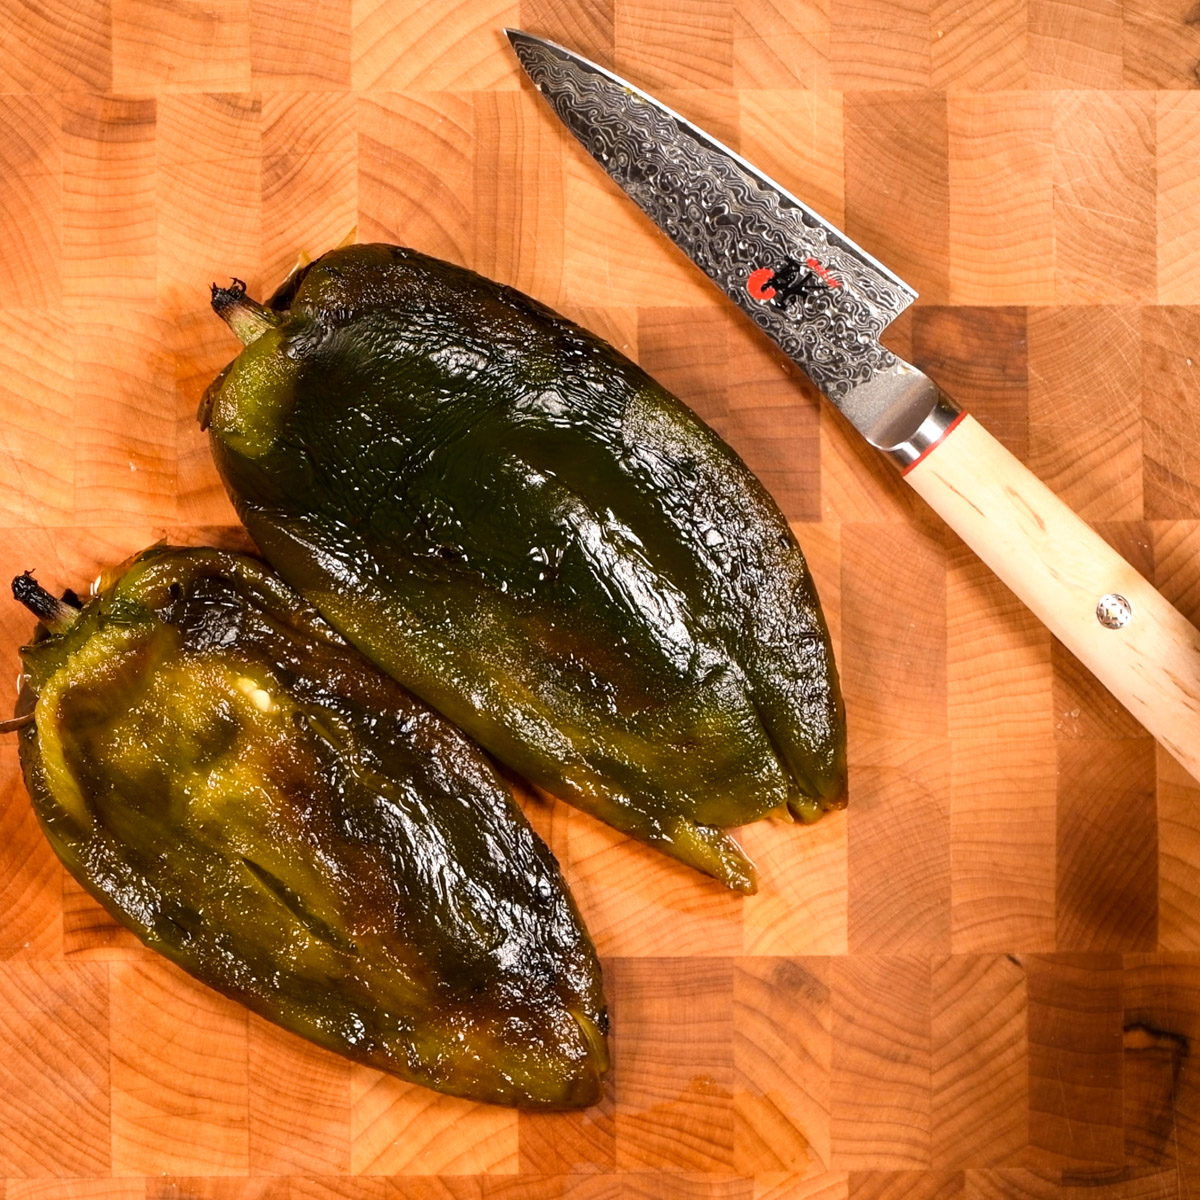 Cut a slit down the side of each poblano and remove the seeds.